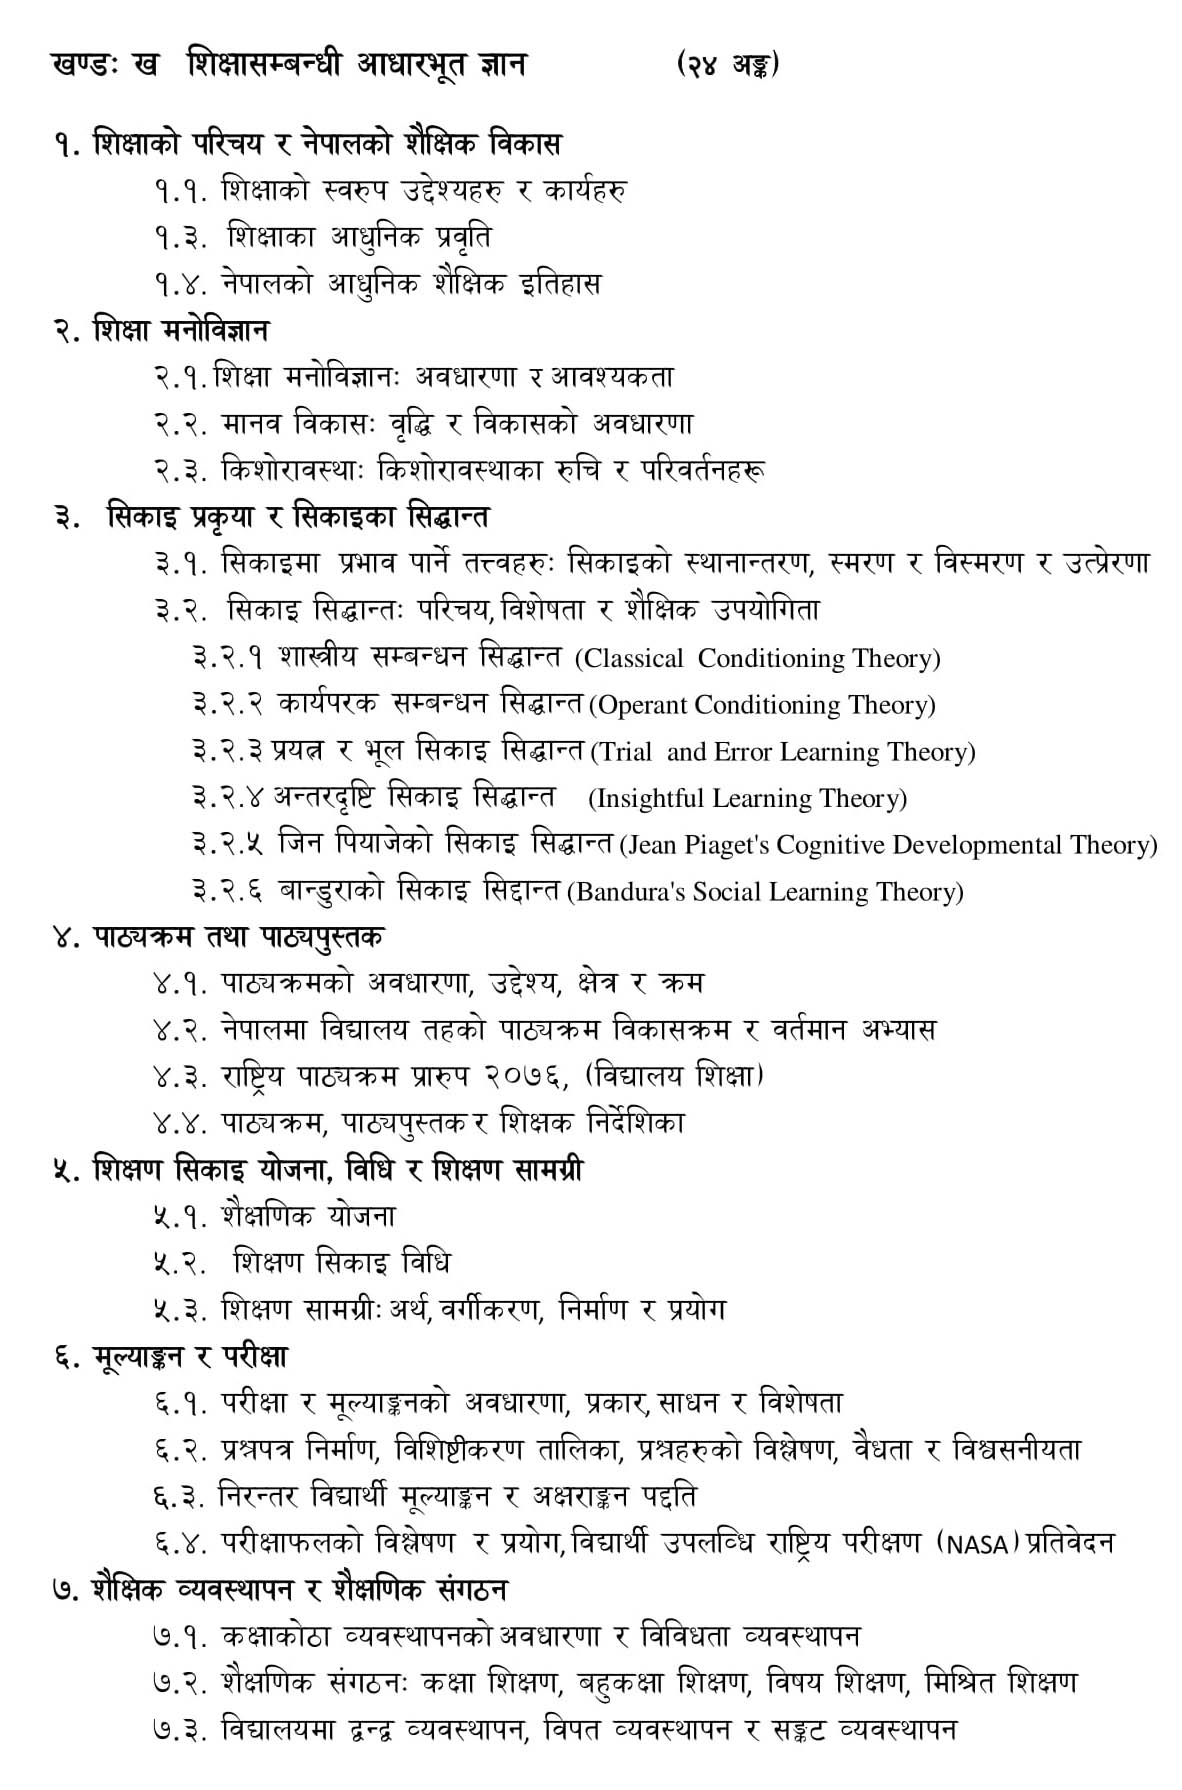 Shikshak Sewa Aayog Curriculum of Secondary Level Objective Question:- We will put the Shikshak Sewa Aayog secondary level objective question syllabus in this post.